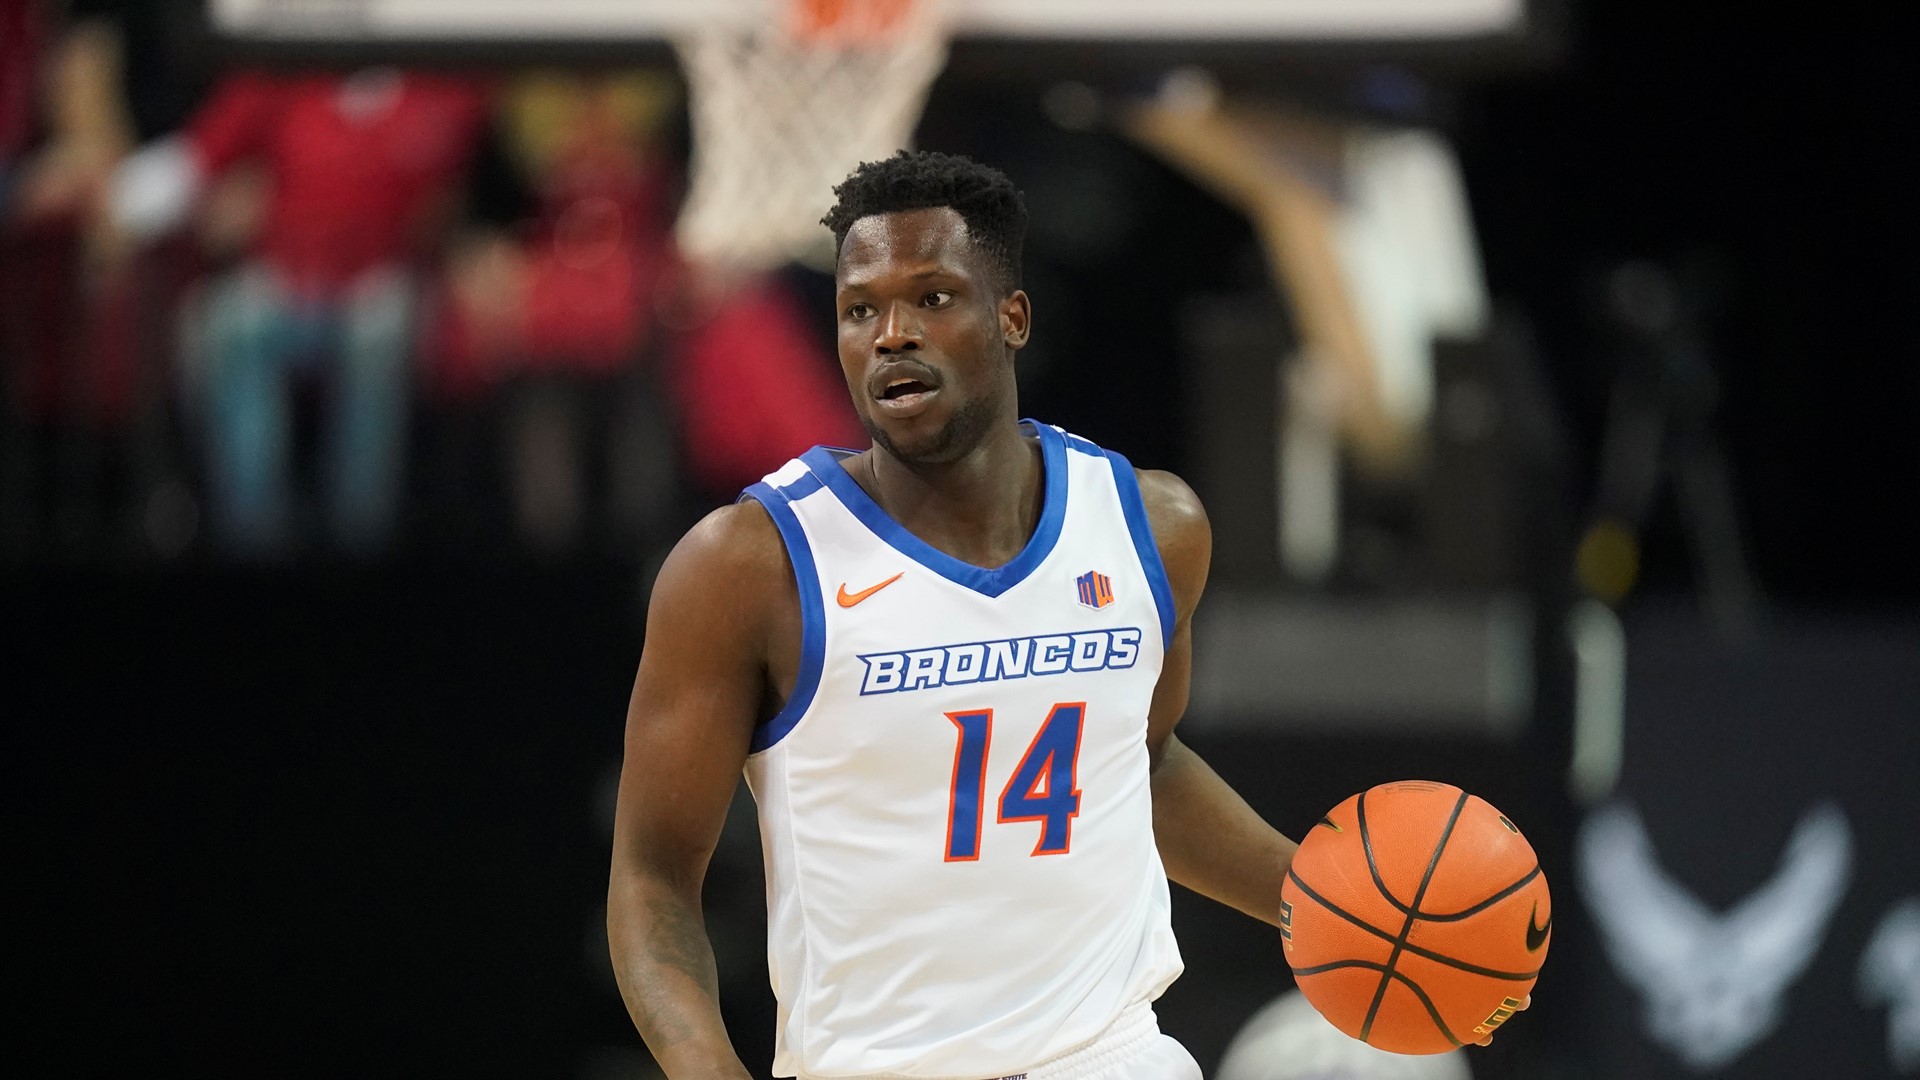 Akot averaged 10.5 points, 3.1 rebounds and 2.8 assists last season, including 40% from the floor and 37.8% from 3.